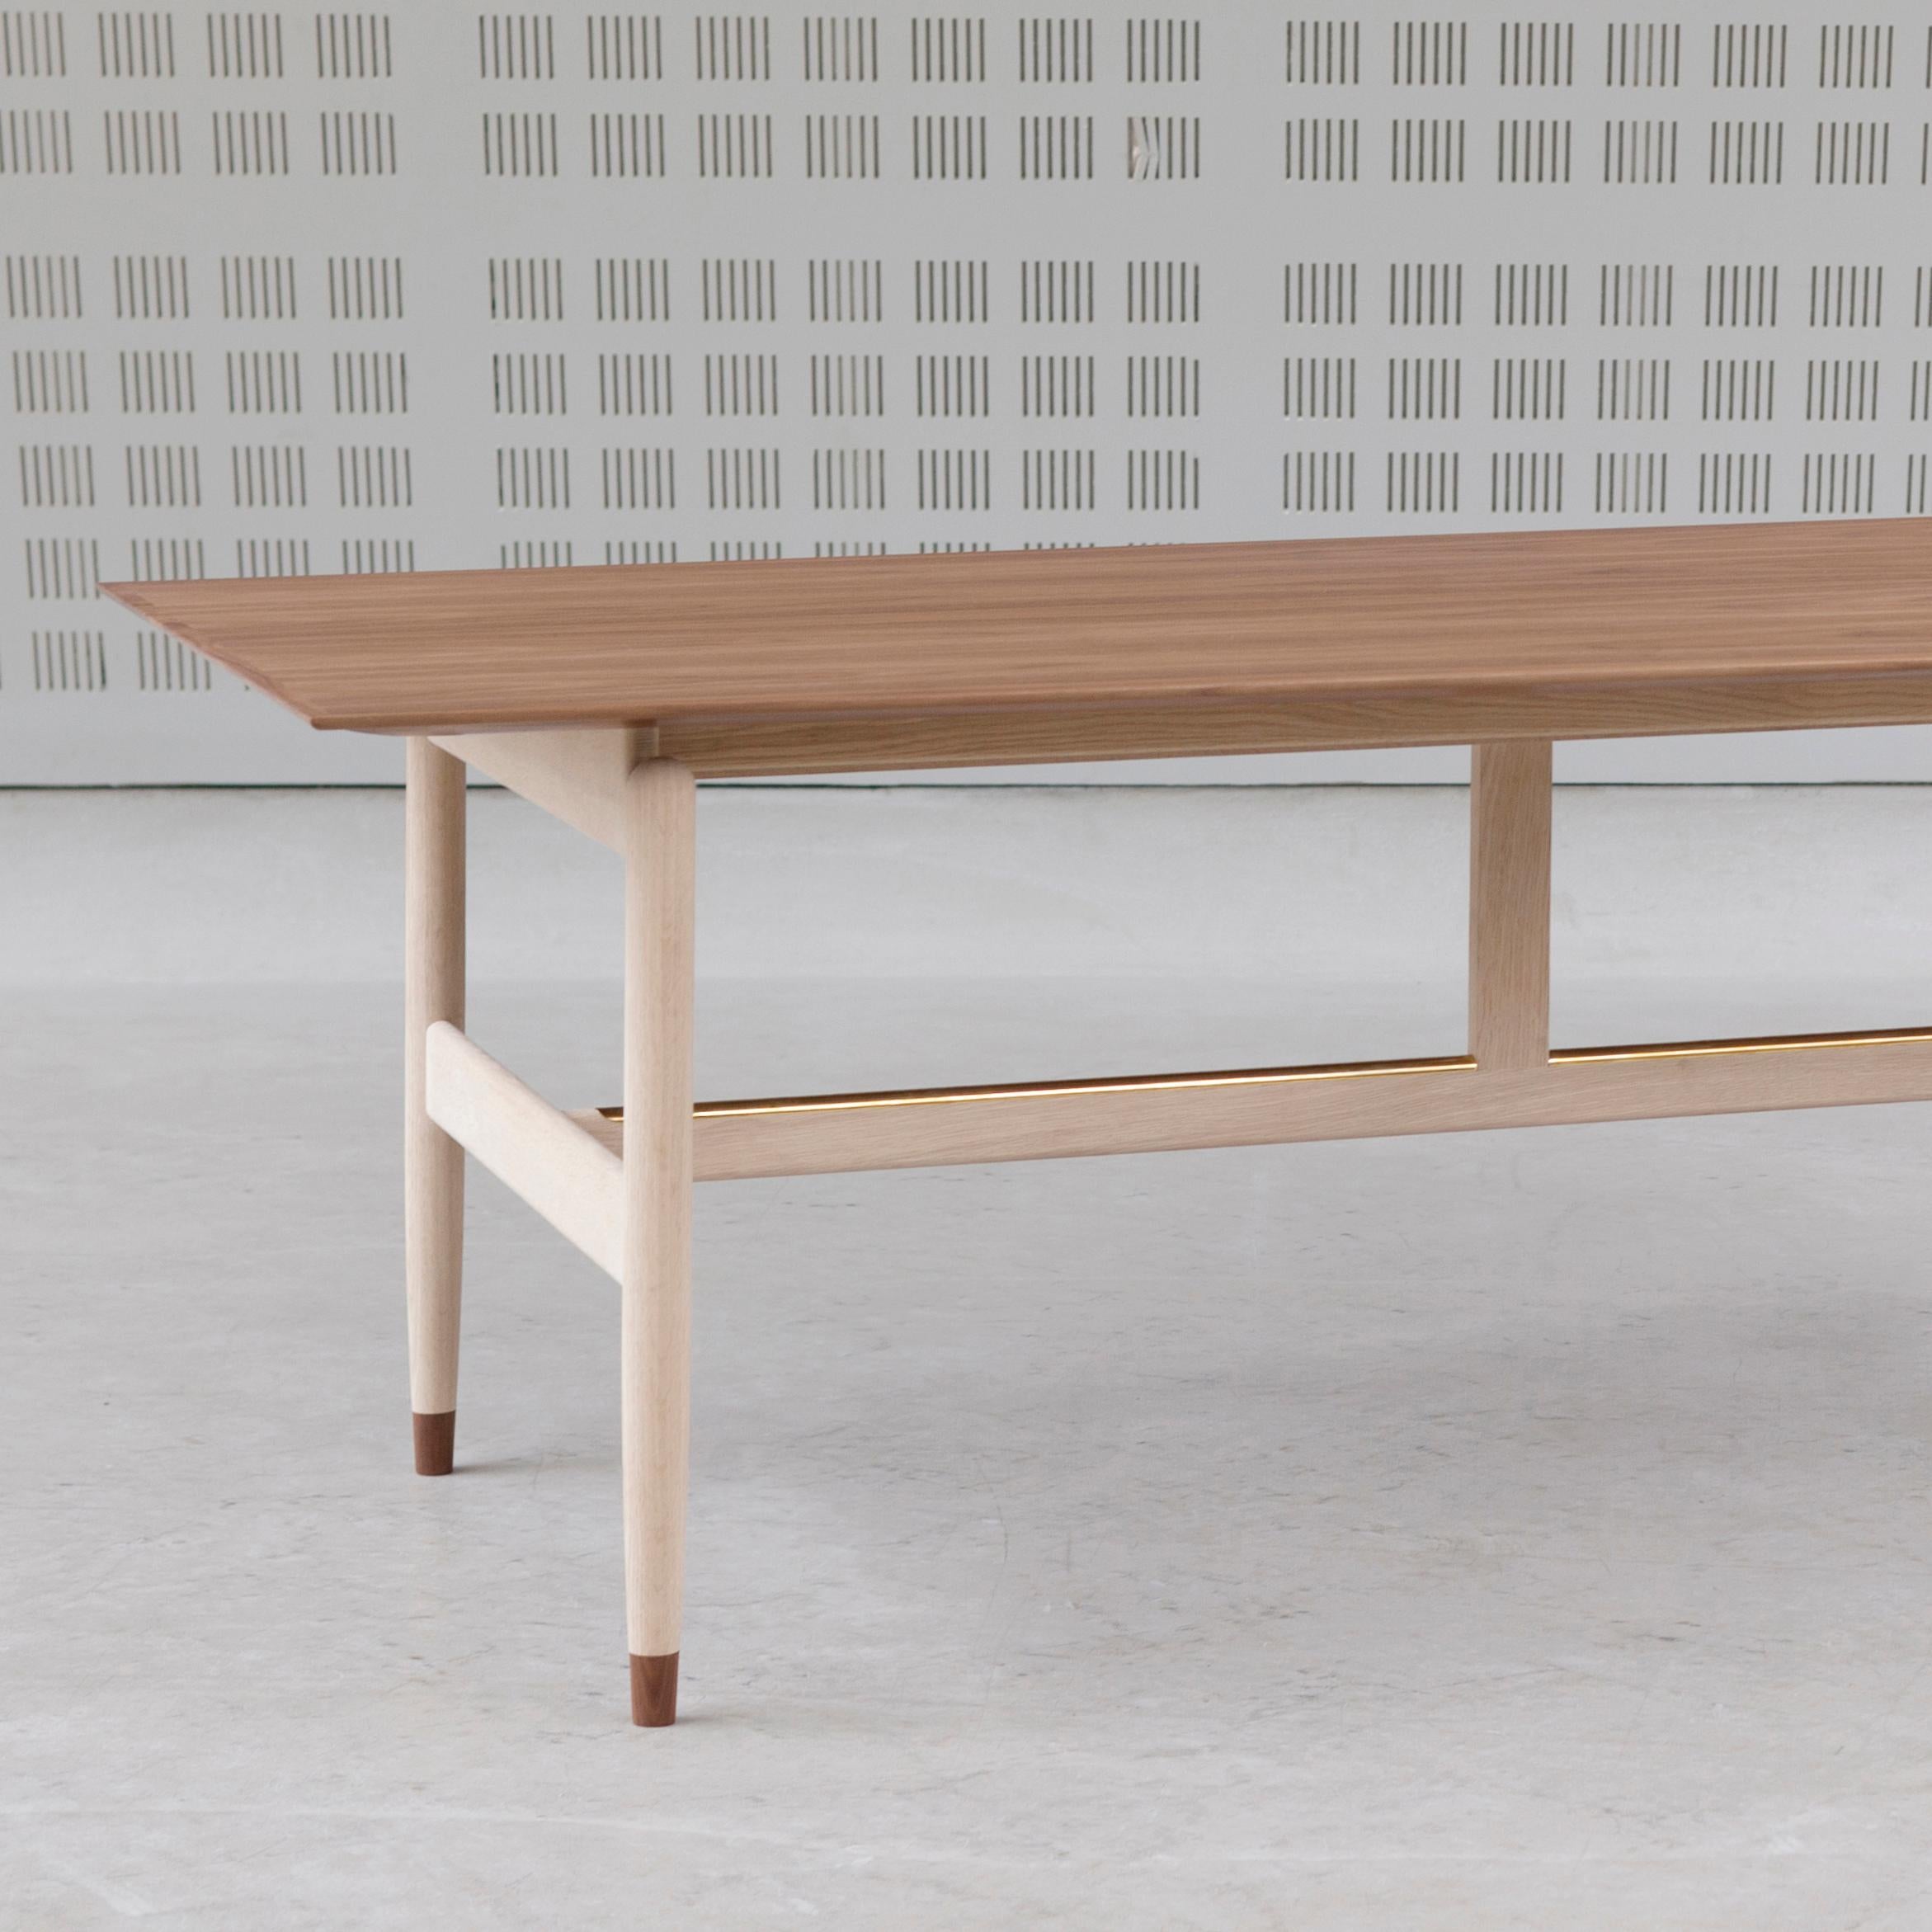 Table designed by Finn Juhl in 1945, relaunched in 2011.
Manufactured by House of Finn Juhl in Denmark.

The Kaufmann Table was originally designed for Finn Juhl’s own home, just like many other of his iconic designs. The table is in a league of